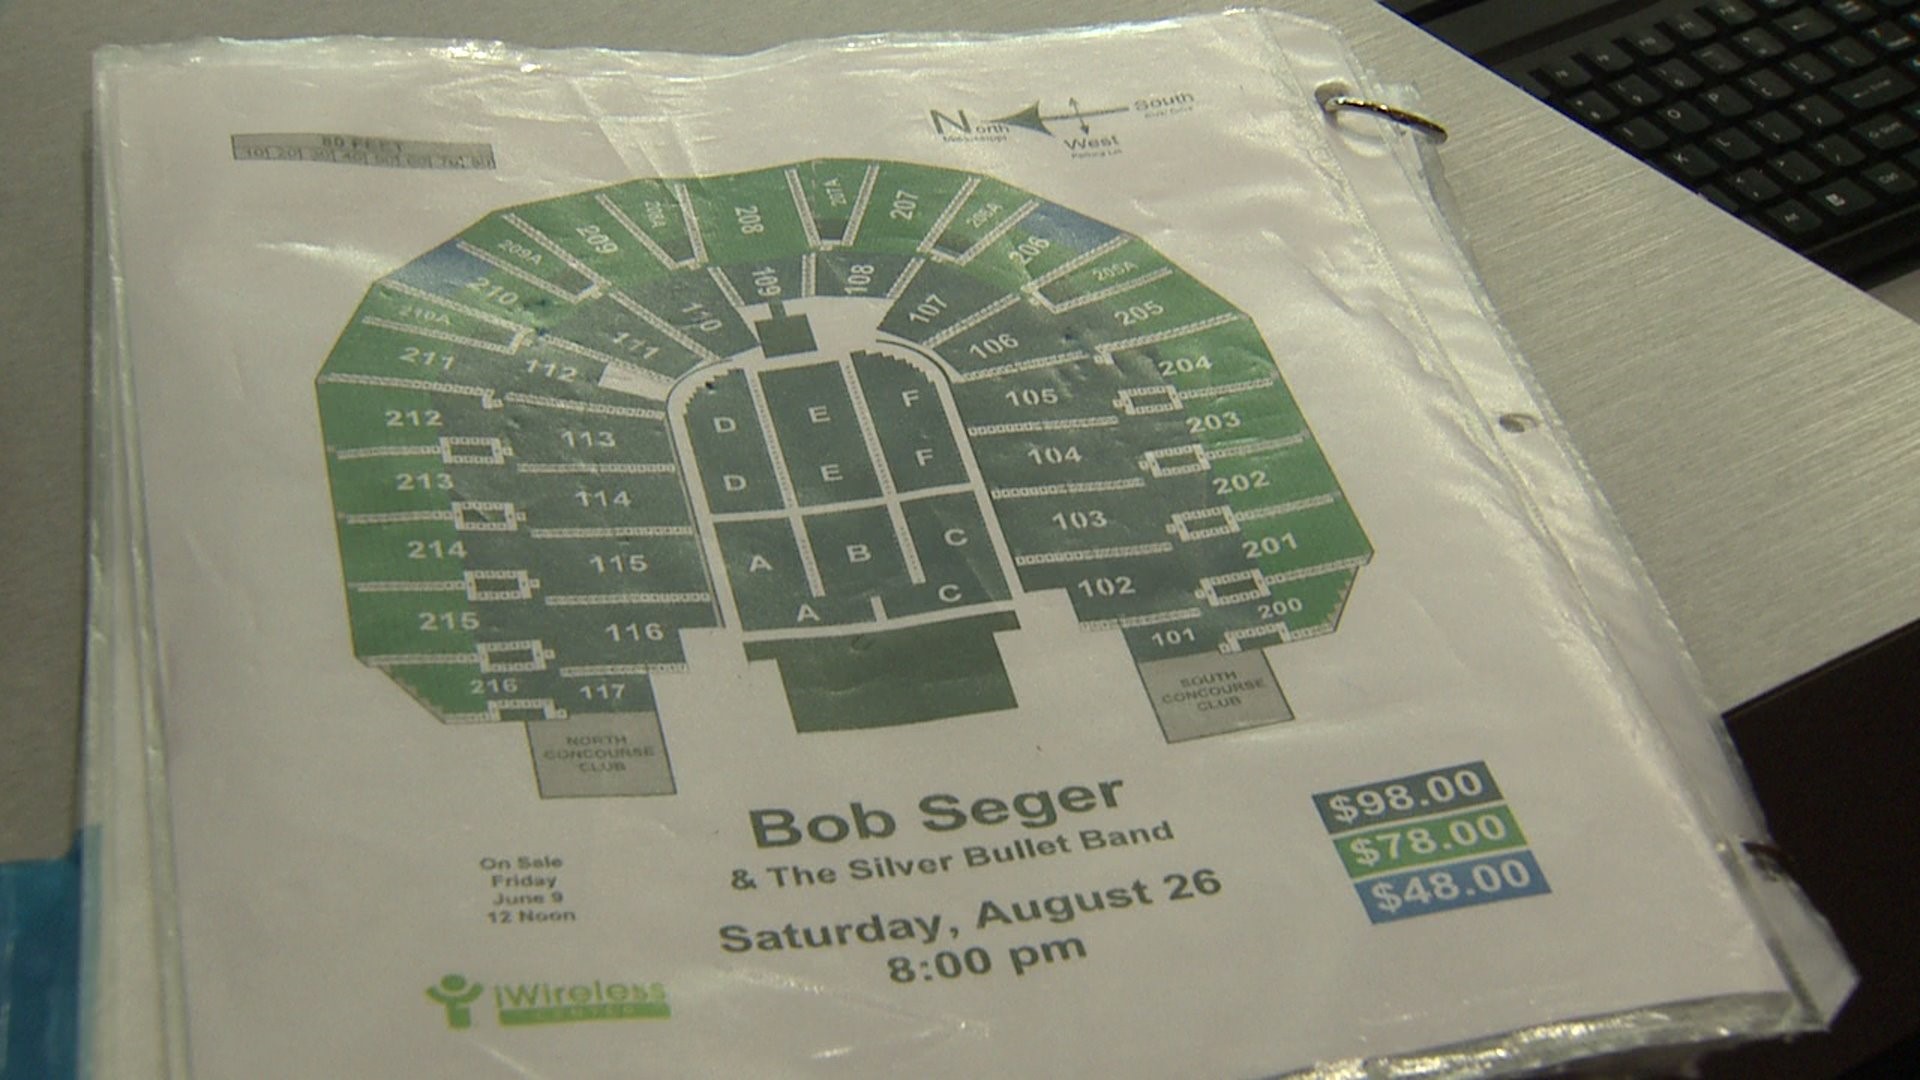 Concert goers find their seats already filled at Bob Seger concert